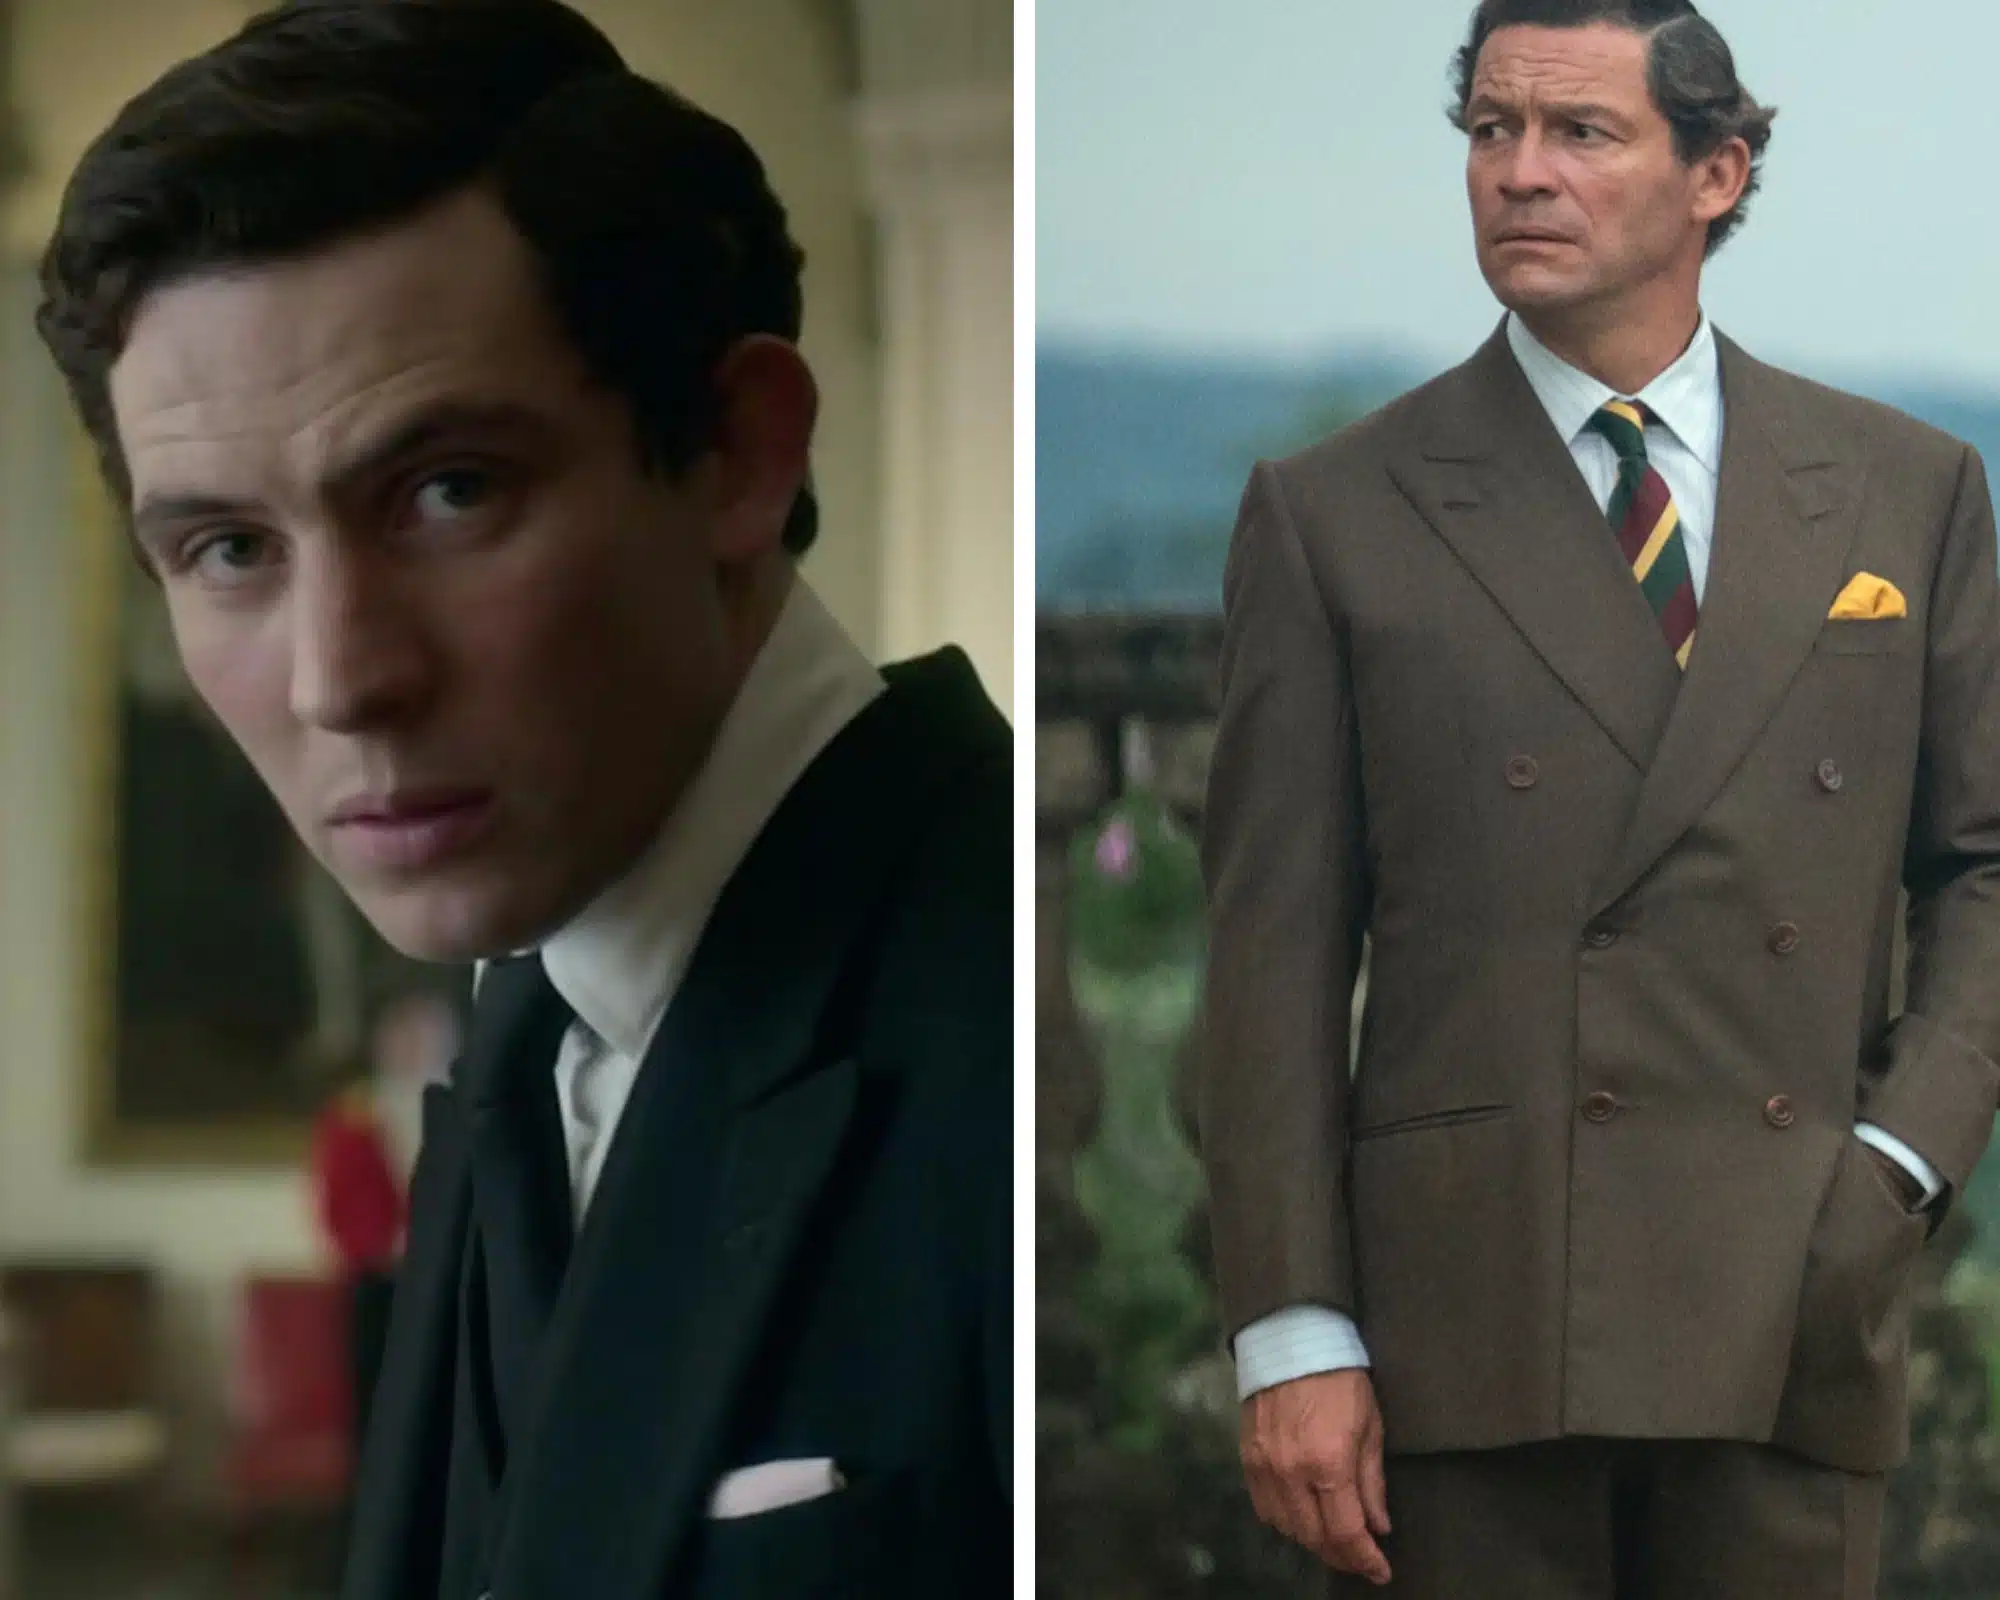 The Crown Season 5 Cast - Josh O'Connor and Dominic West as Prince Charles 